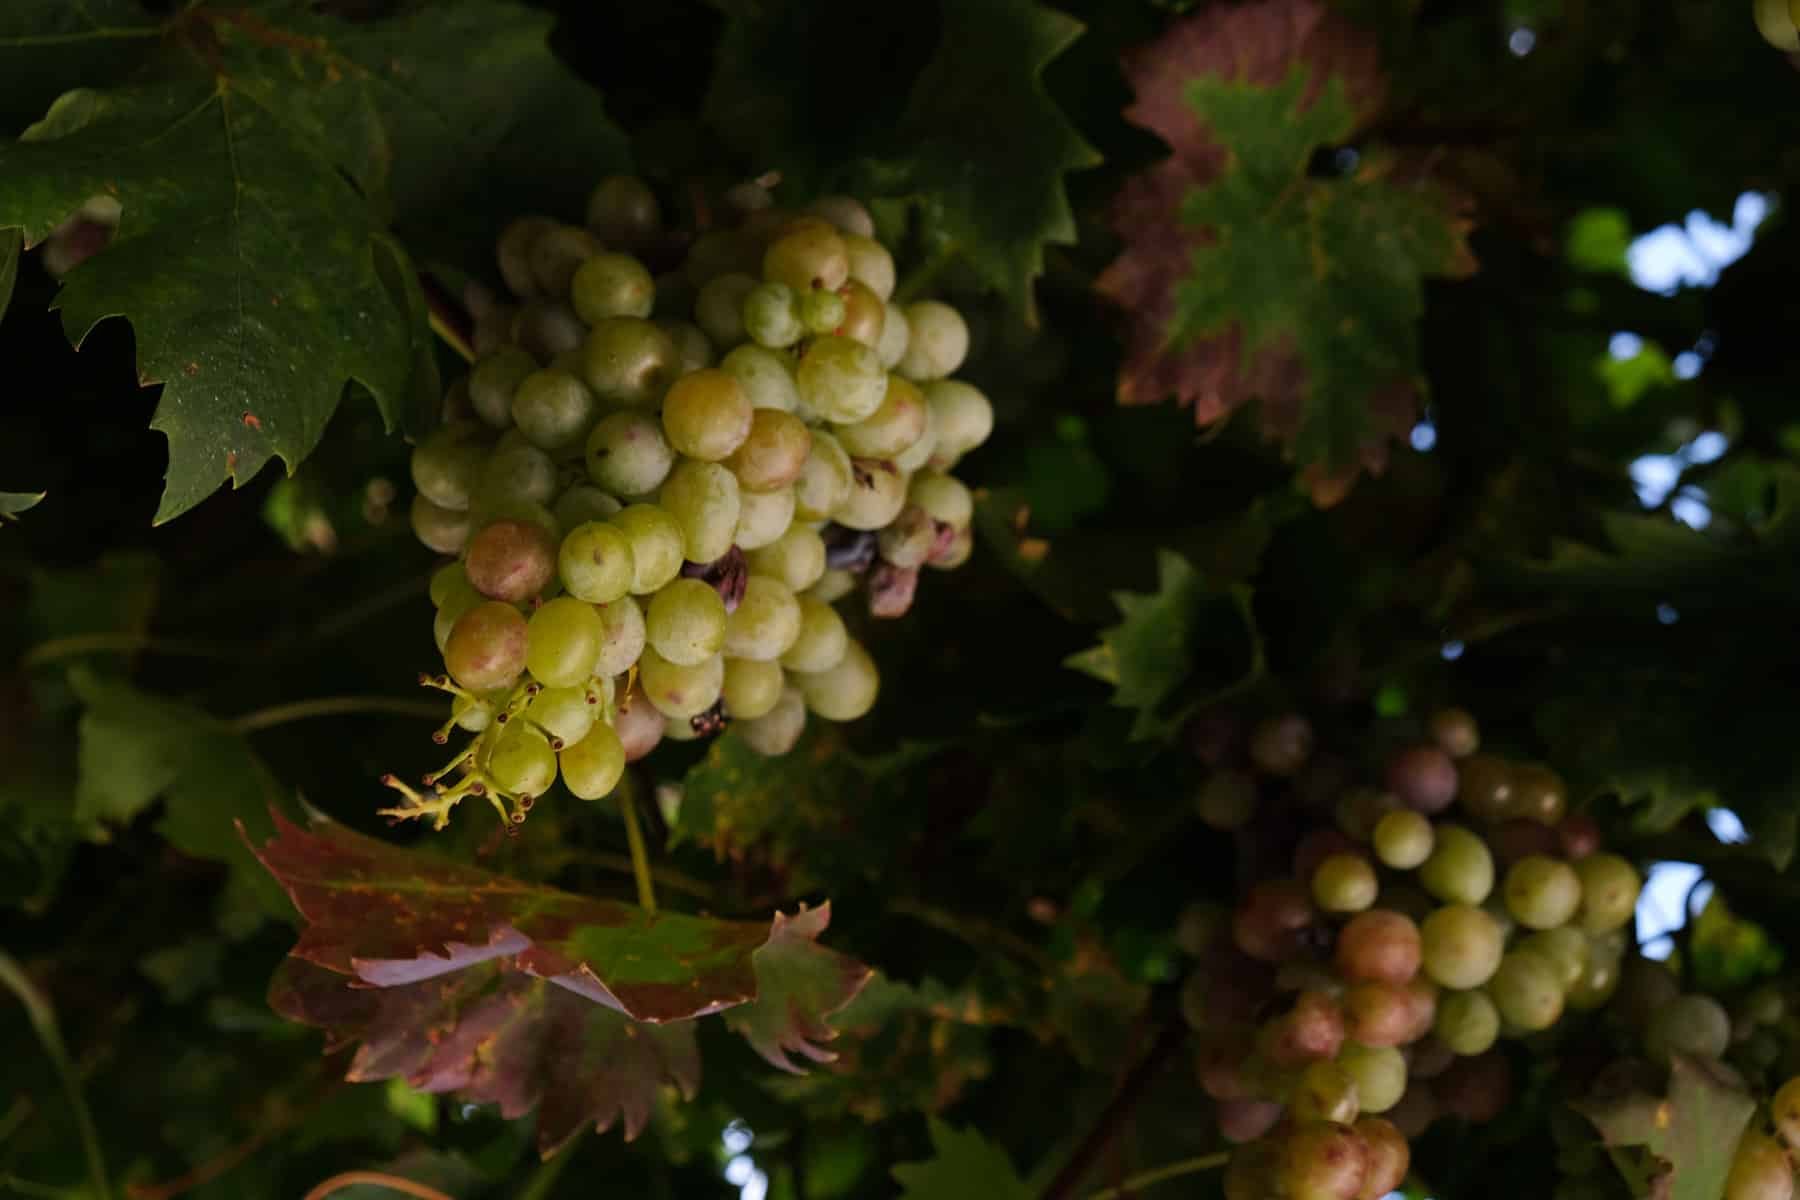 A cluster of grapes hanging from a tree at a winery in Istria